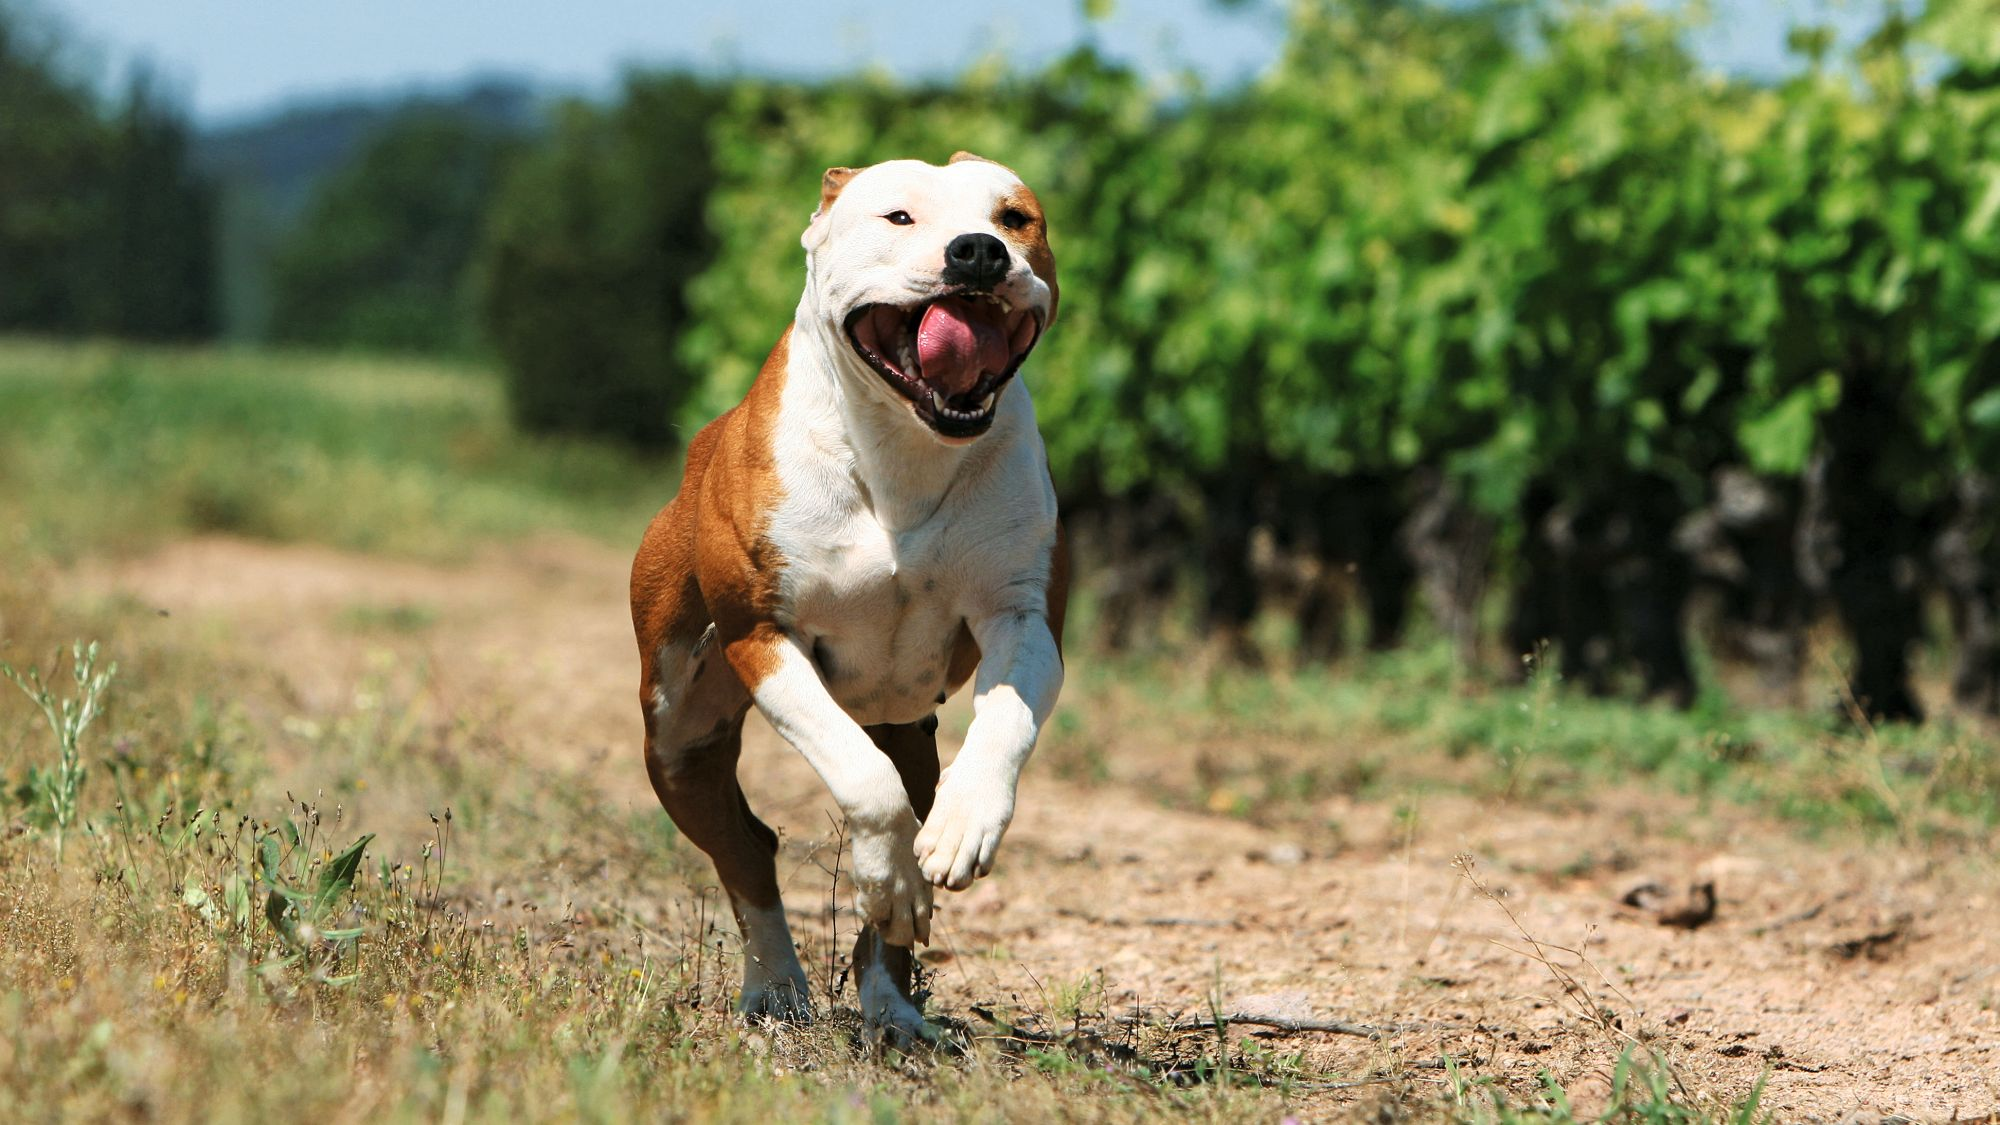 American Staffordshire Terrier running towards camera with tongue out